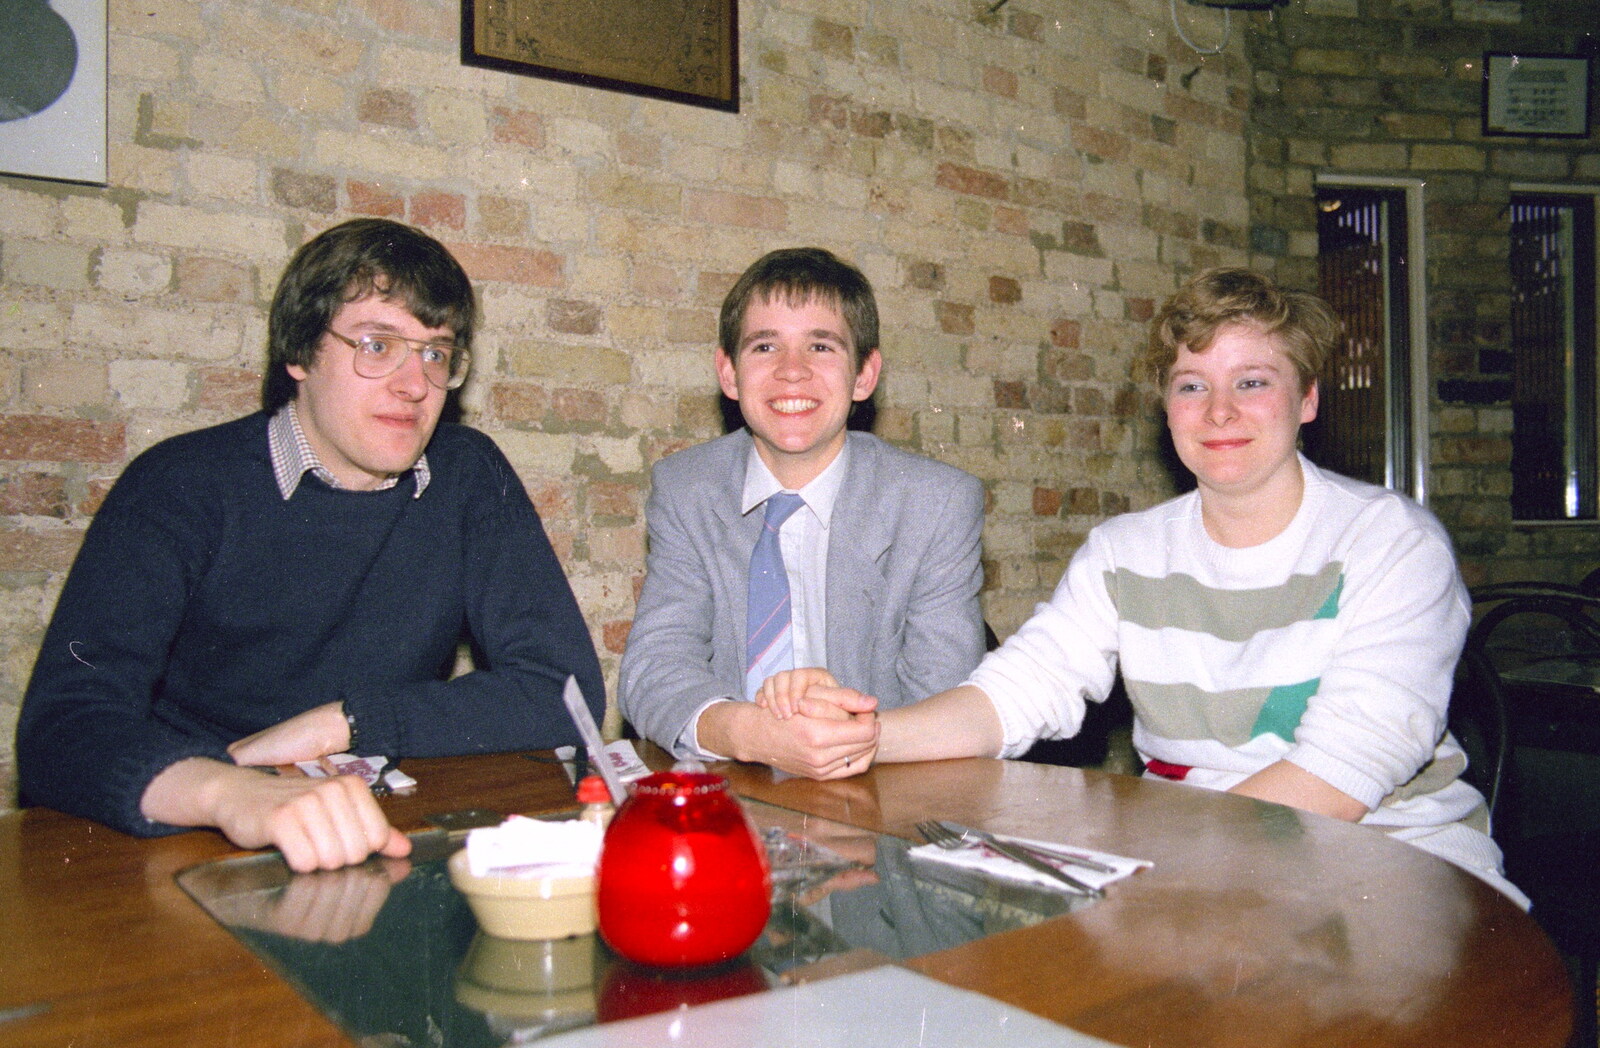 Duncan, Phil and Anna from A Trip to Trinity College, Cambridge - 23rd March 1986